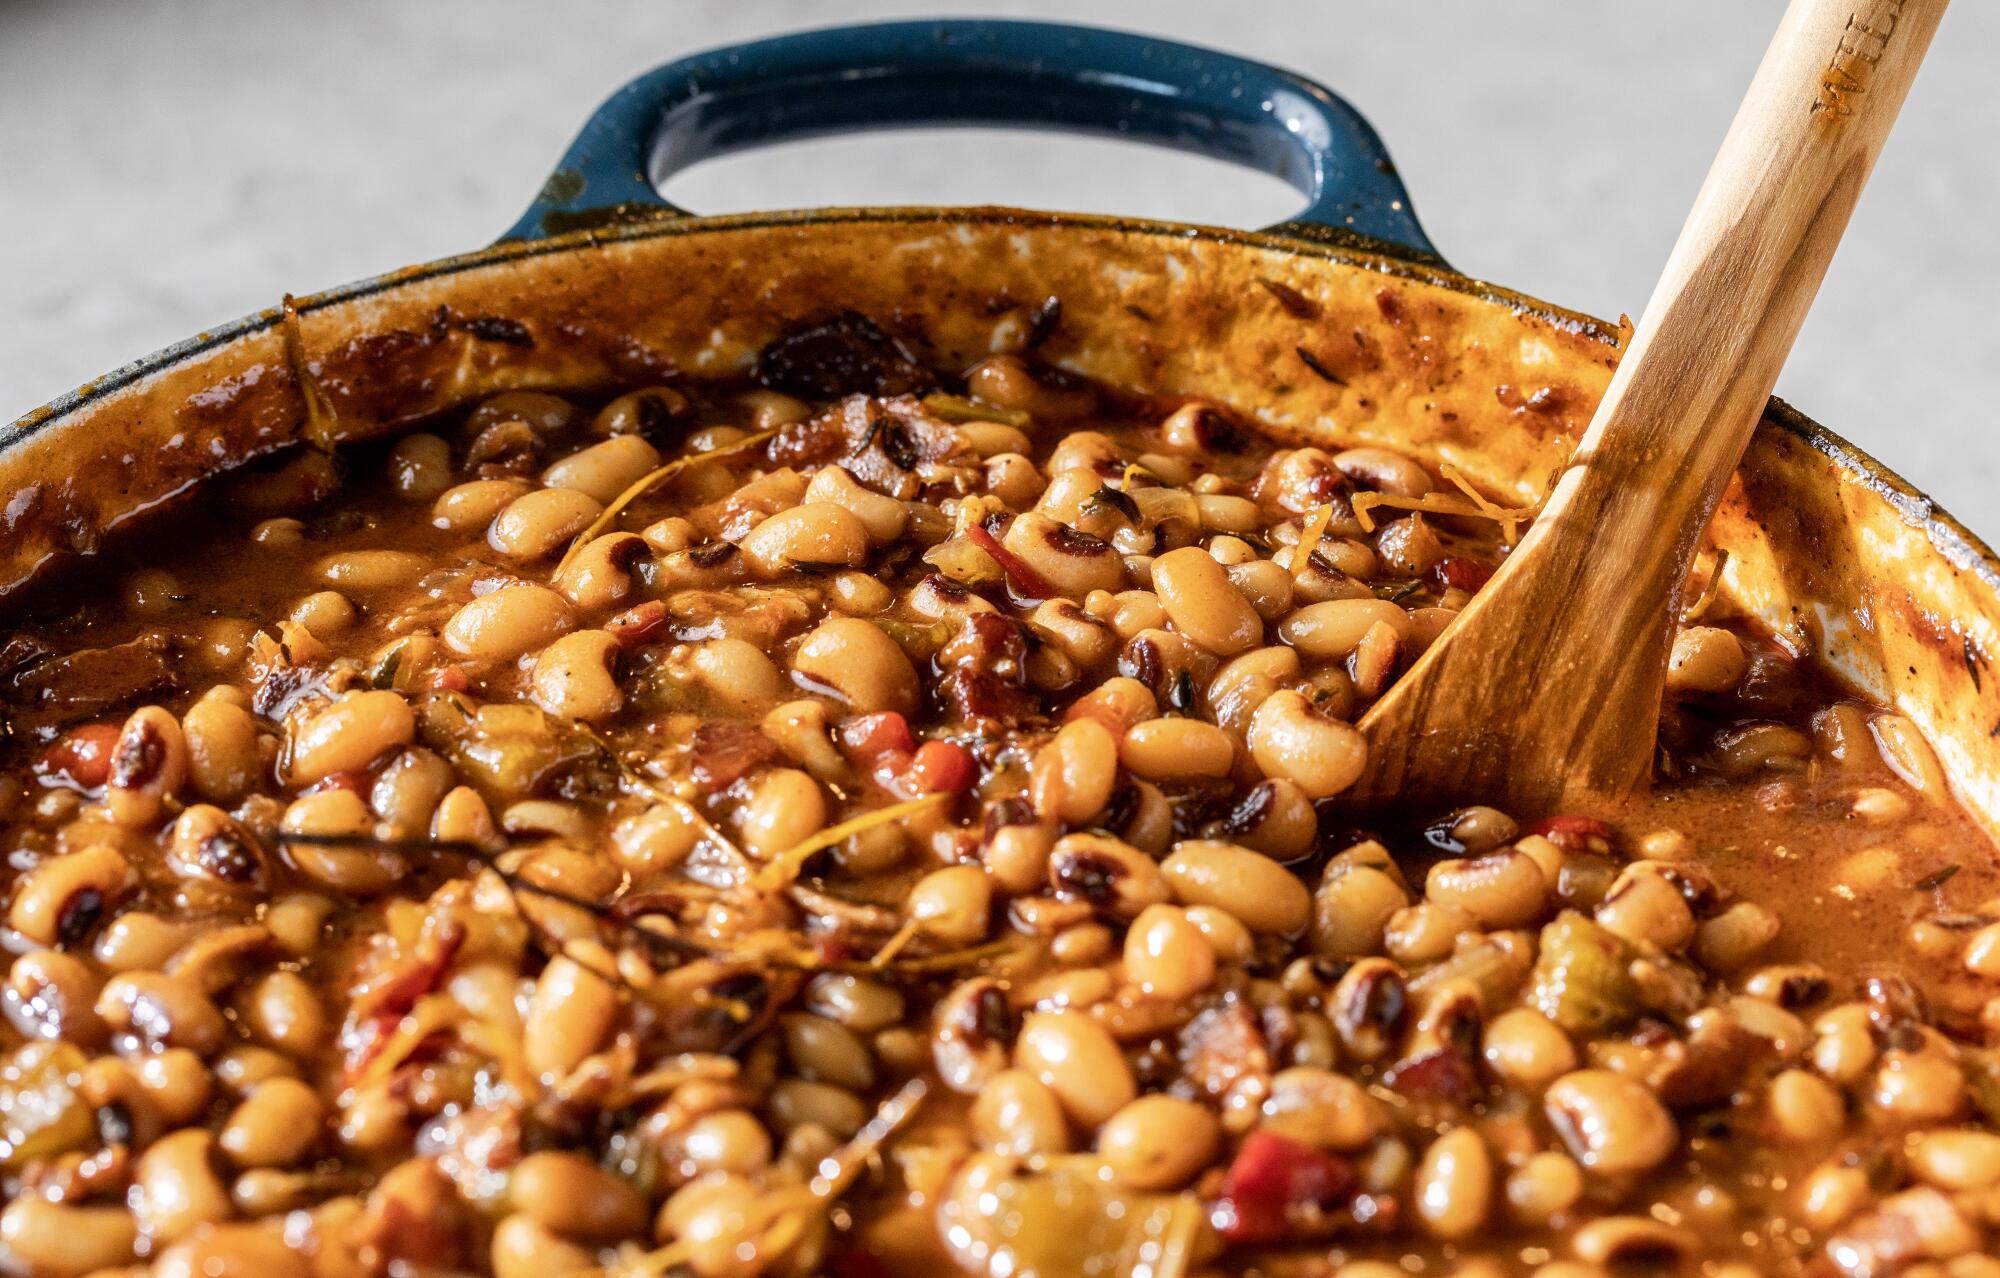 Baked beans are made with ketchup, brown sugar and a plethora of spices for warmth and sweetness.